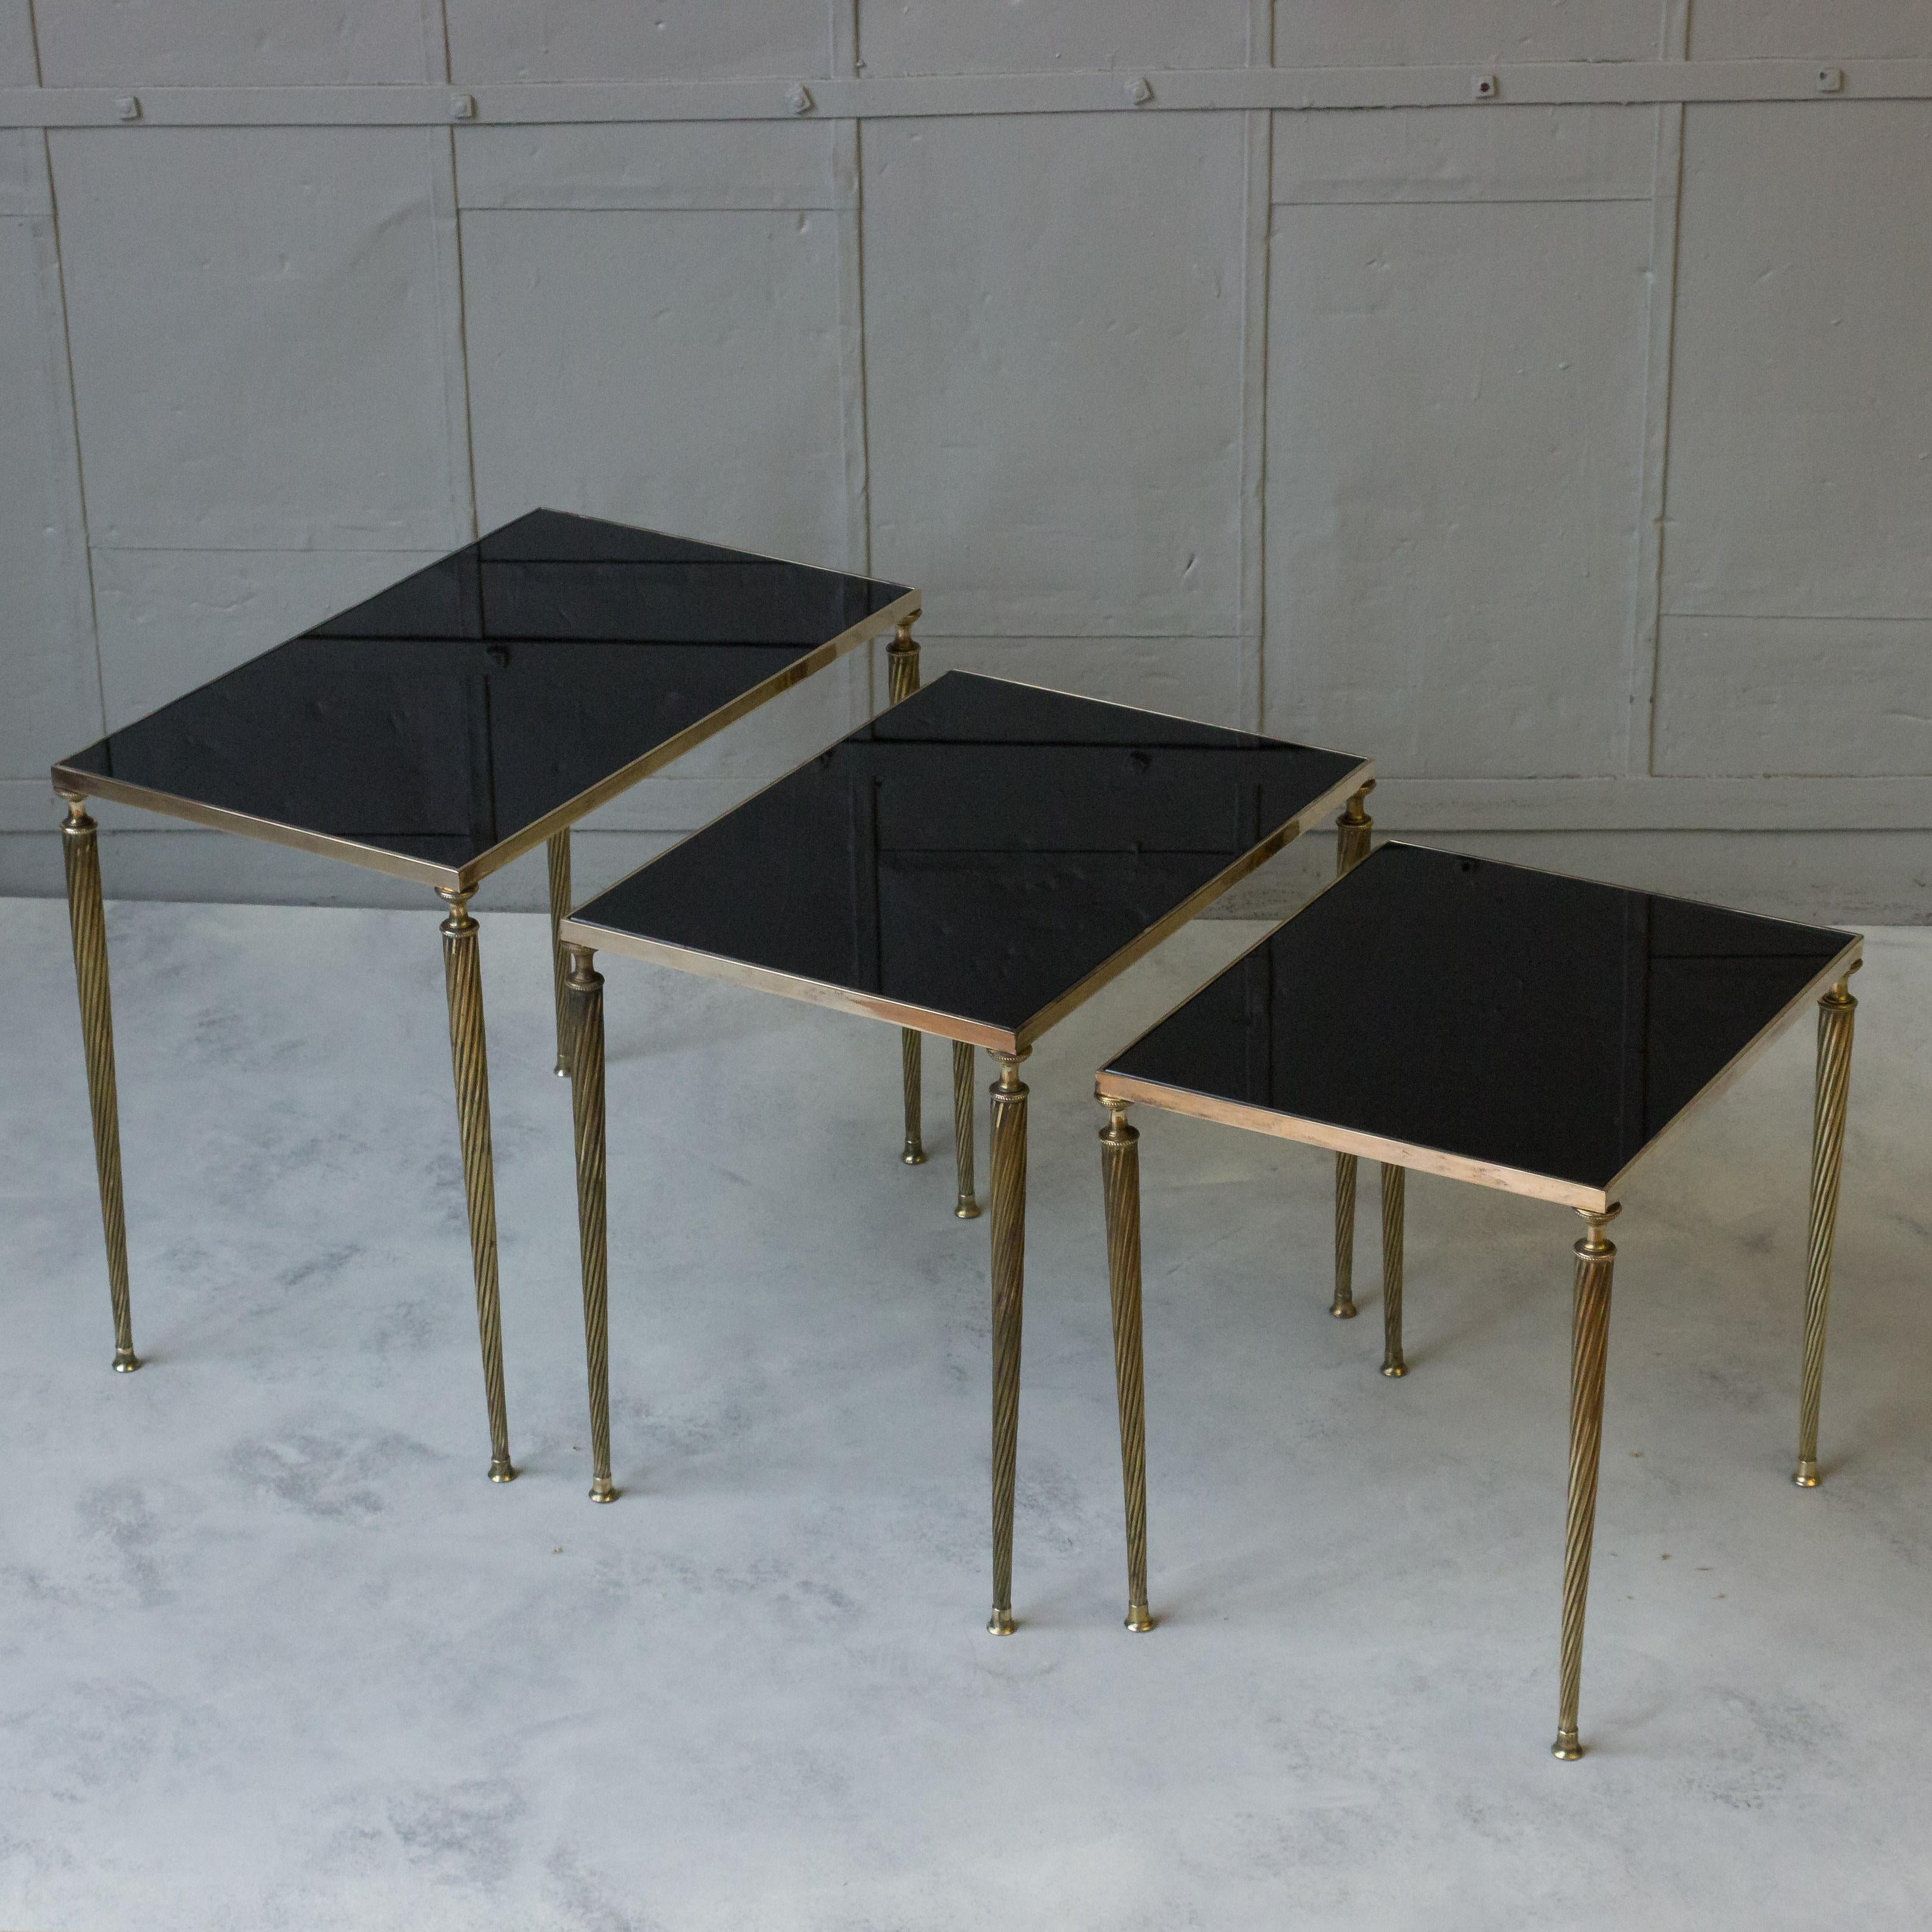 Neoclassical Revival  Set of 3 French Black Glass and Brass Nesting Tables   For Sale